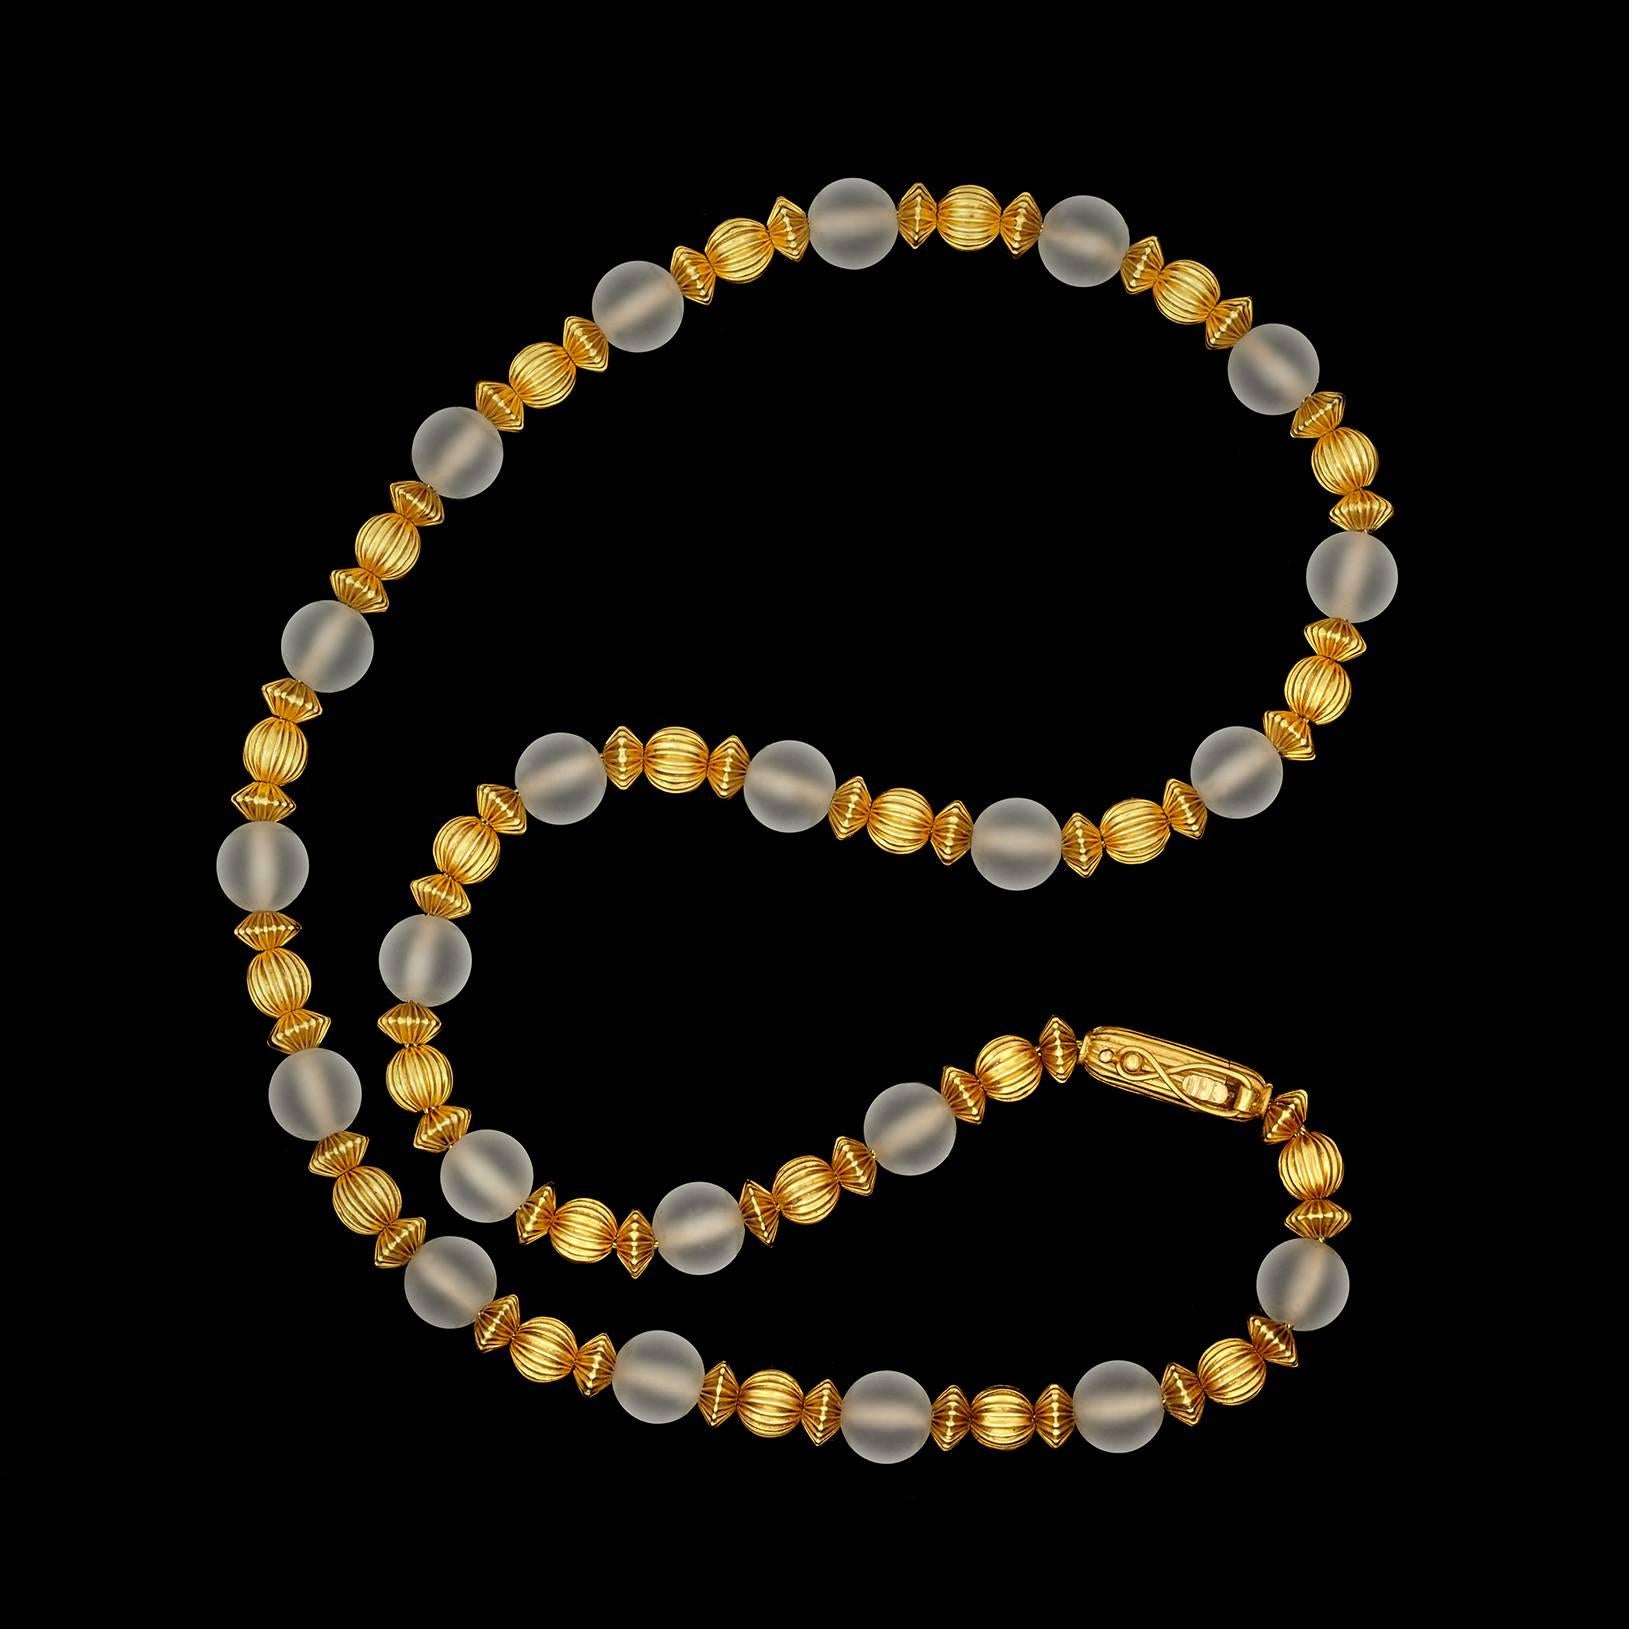 Lalaounis Alternating Rock Crystal Quartz and 18Kt Yellow Gold Textured Beads strung on a yellow gold Braided chain. The size of the quartz crystals is 9.0mm. Length is 20 inches and weighs 52.1 grams total.